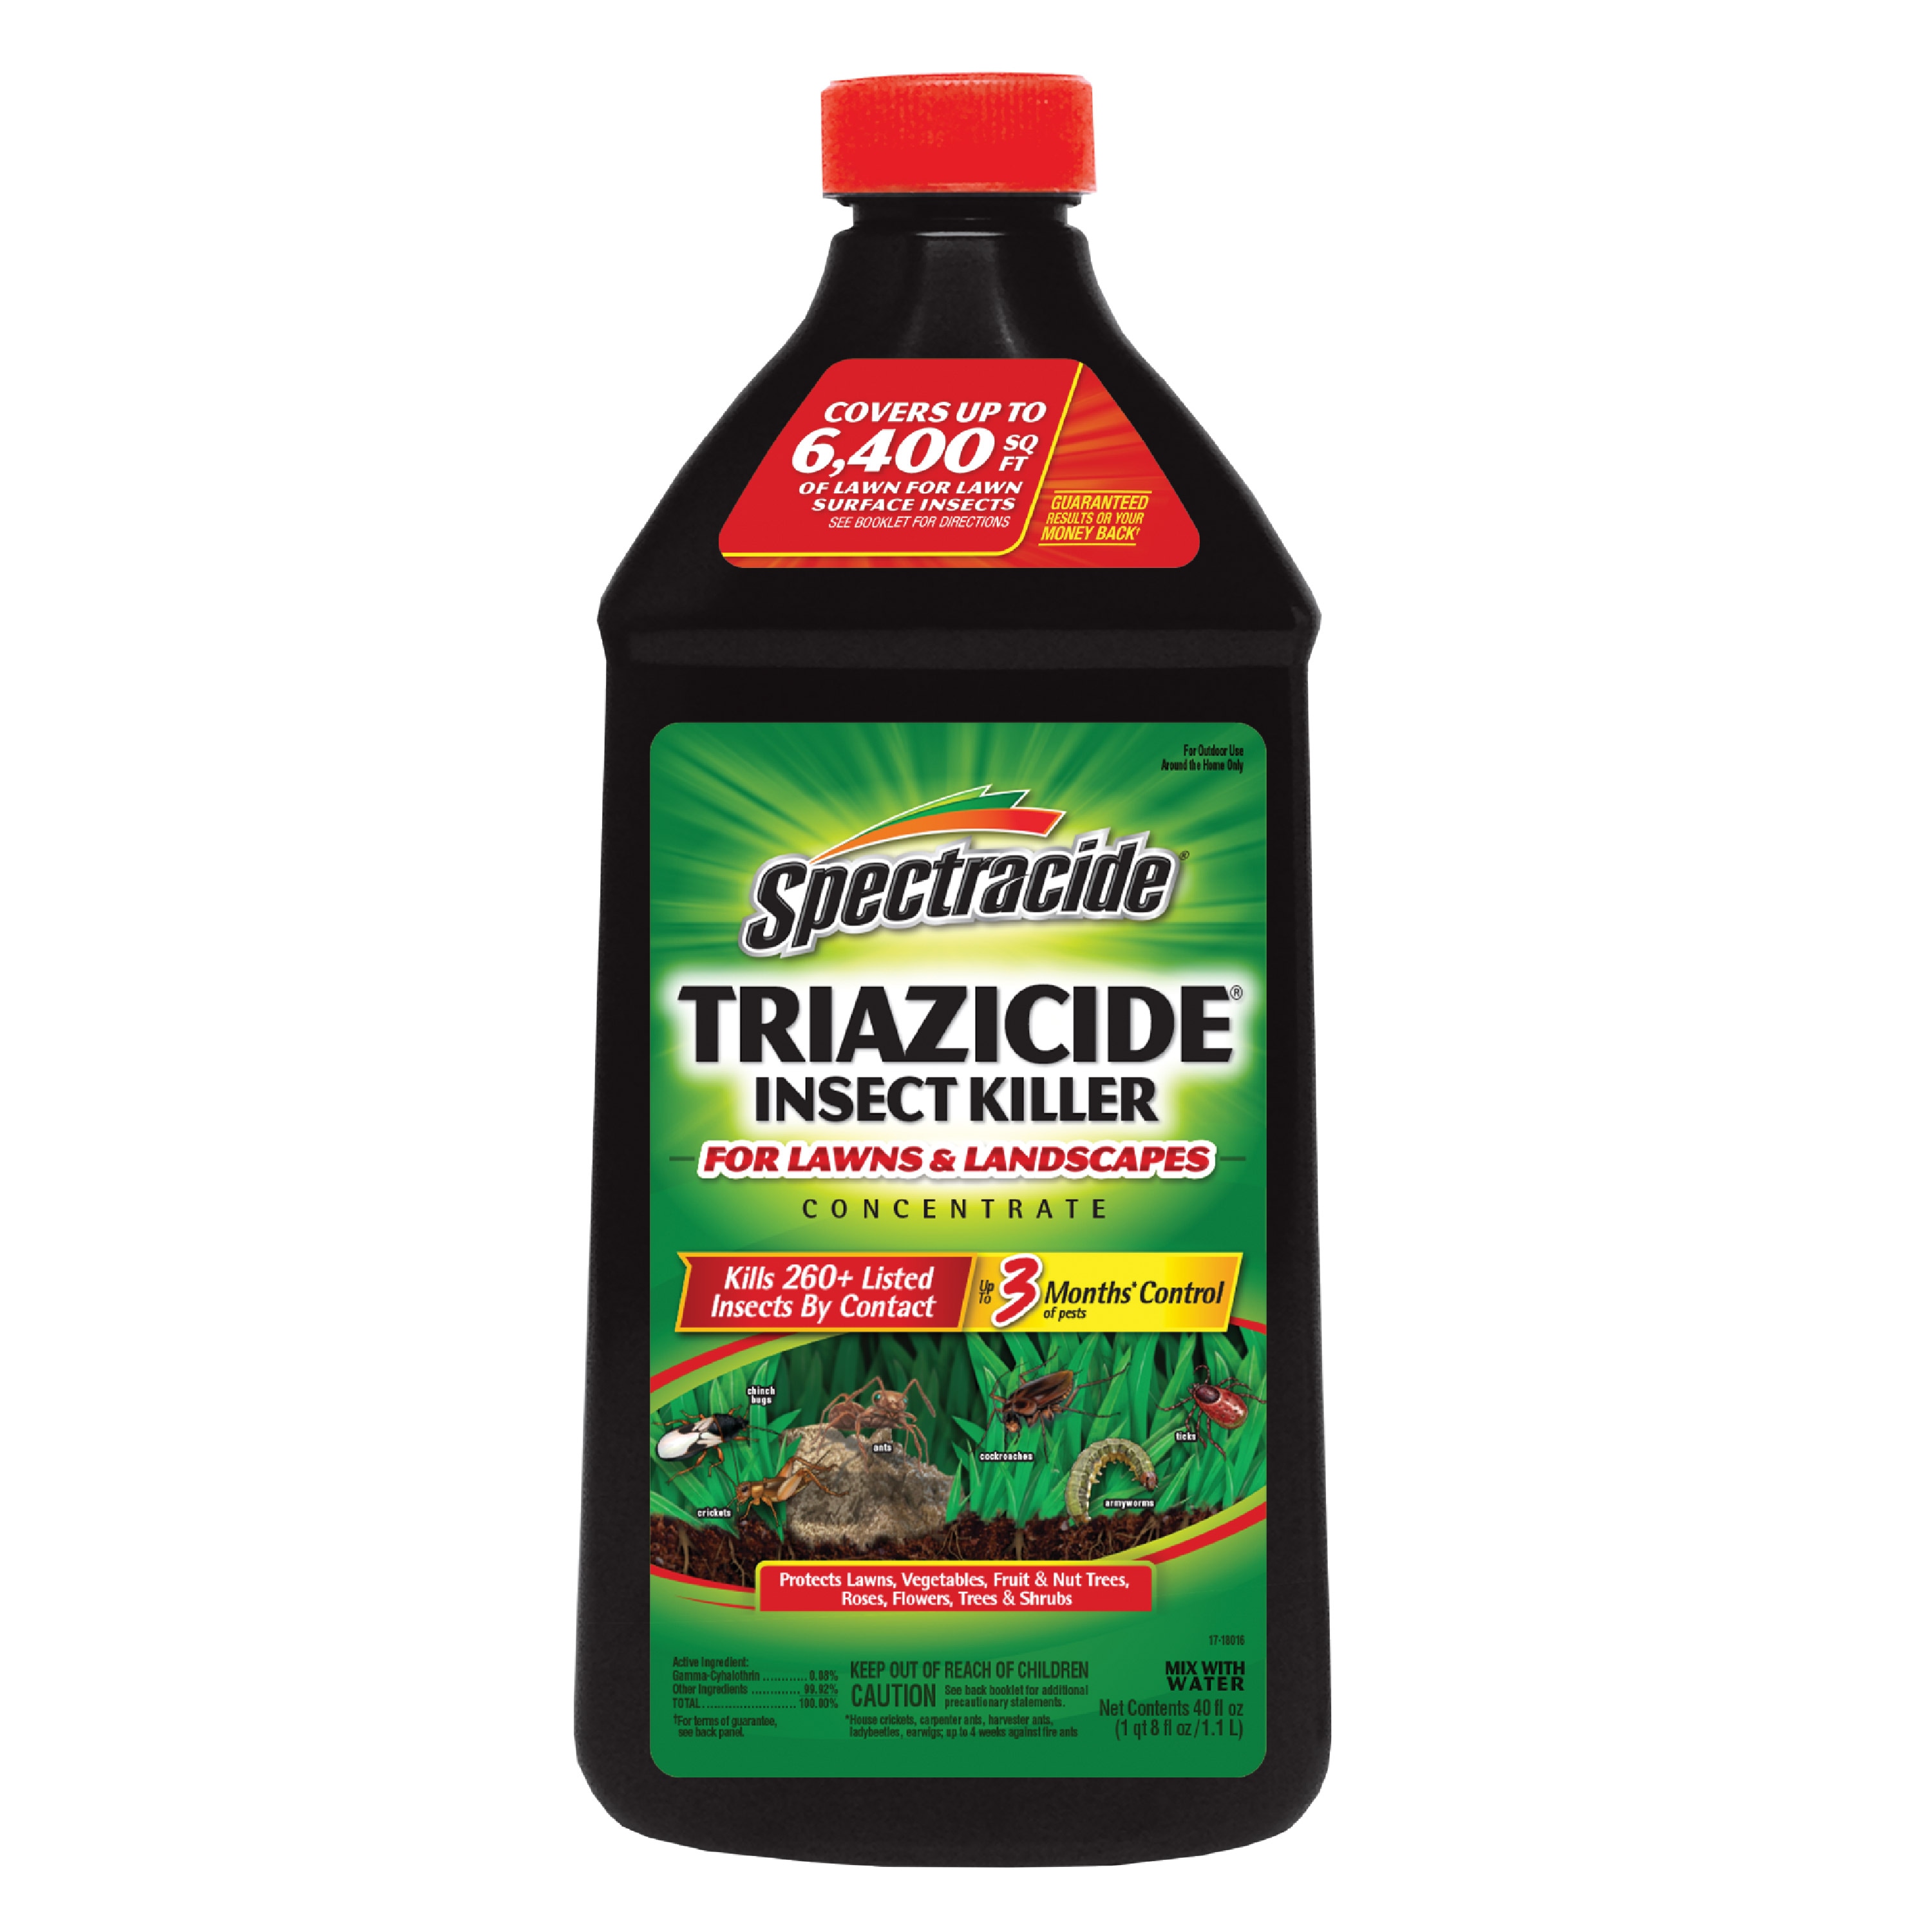 Spectracide 32 Fl Oz Triazicide For Lawns And Landscapes Concentrate Insect Killer At